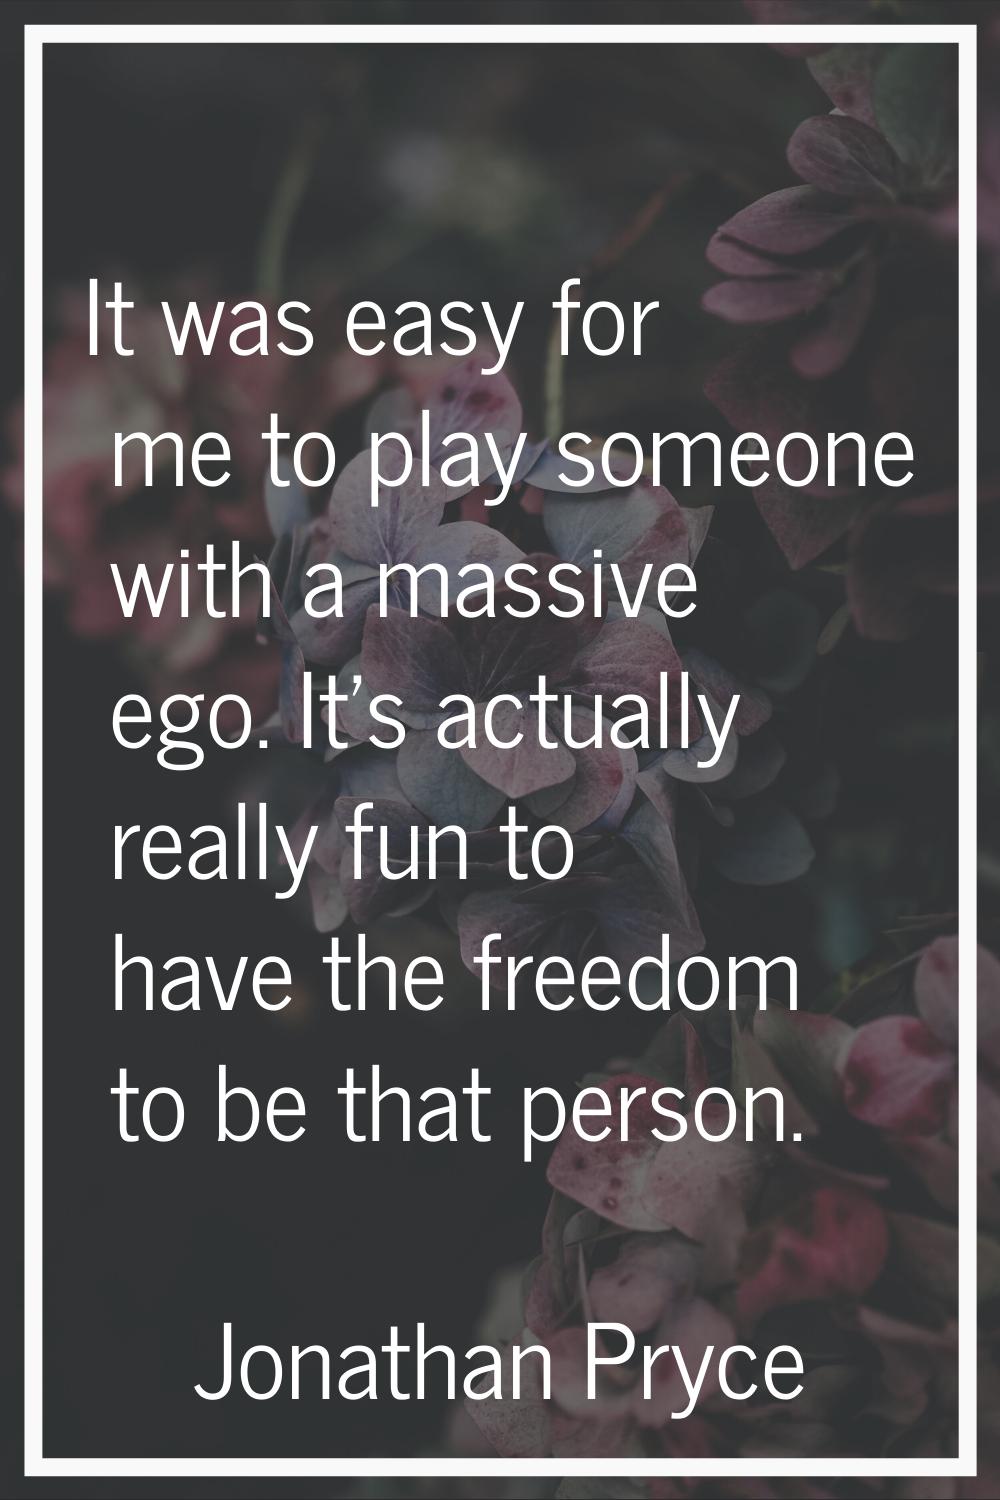 It was easy for me to play someone with a massive ego. It's actually really fun to have the freedom